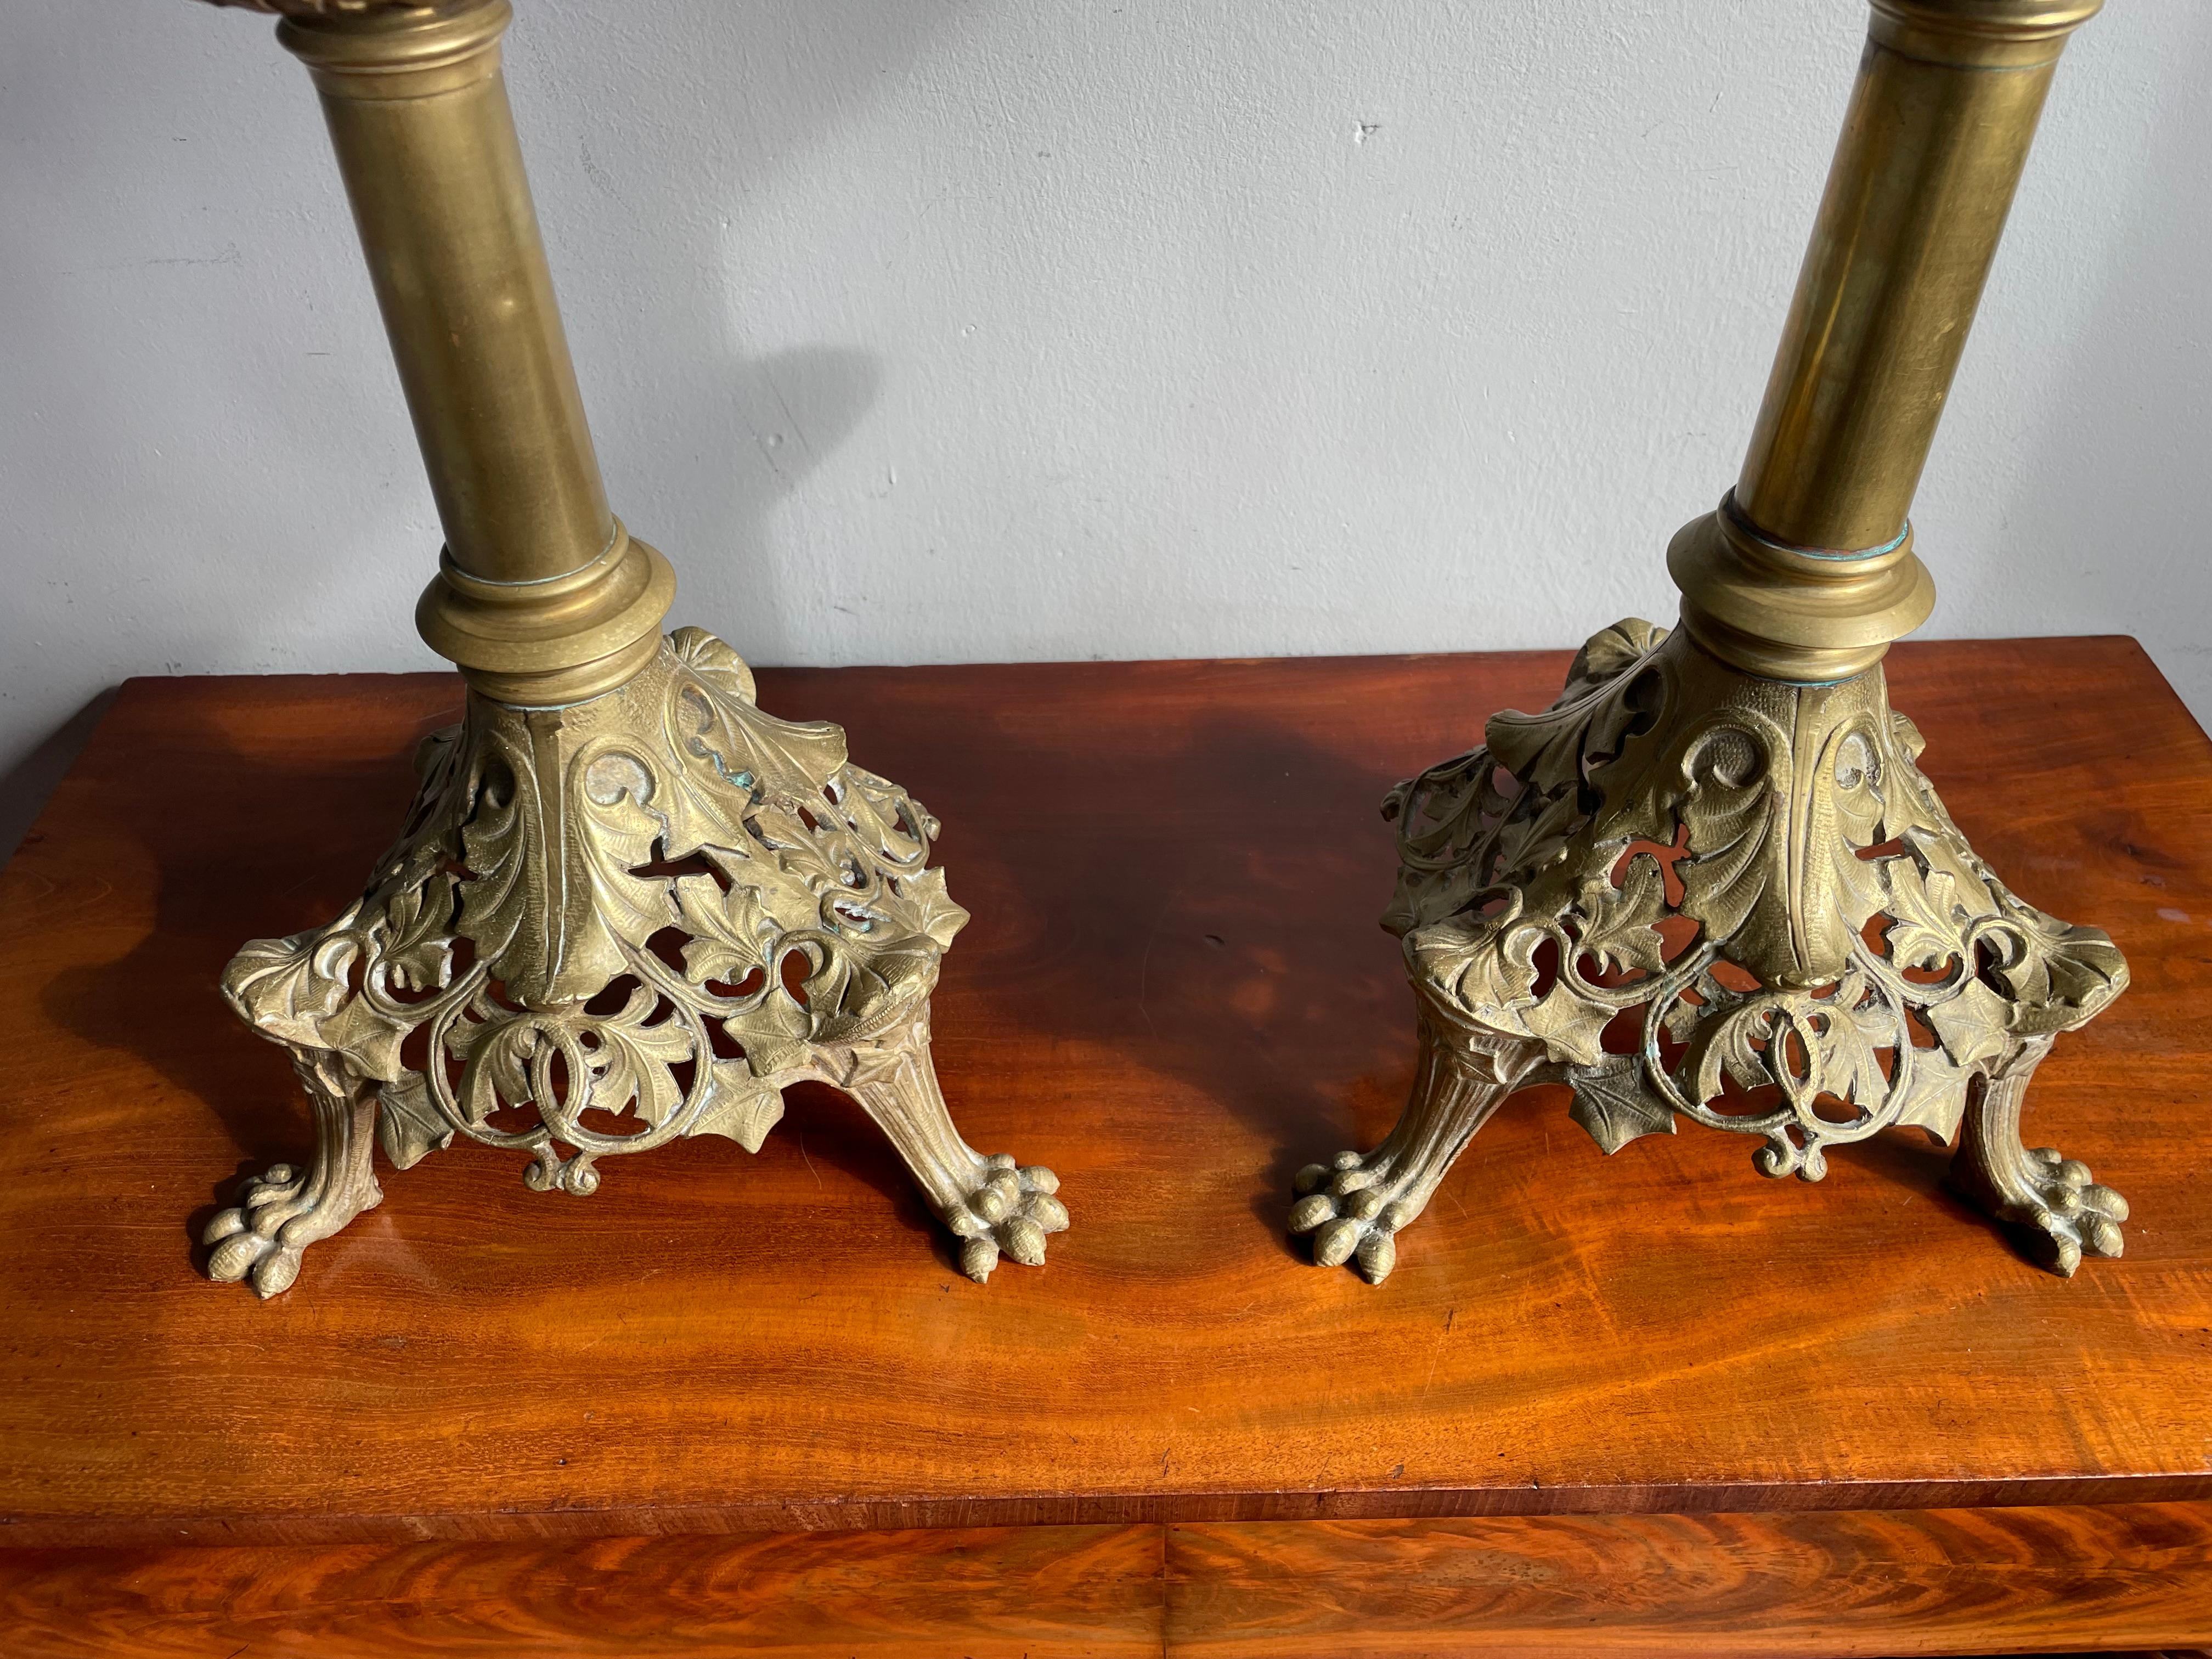 Antique Pair of Bronze Gothic Revival Church Altar Candlesticks / Candle Holders In Good Condition For Sale In Lisse, NL